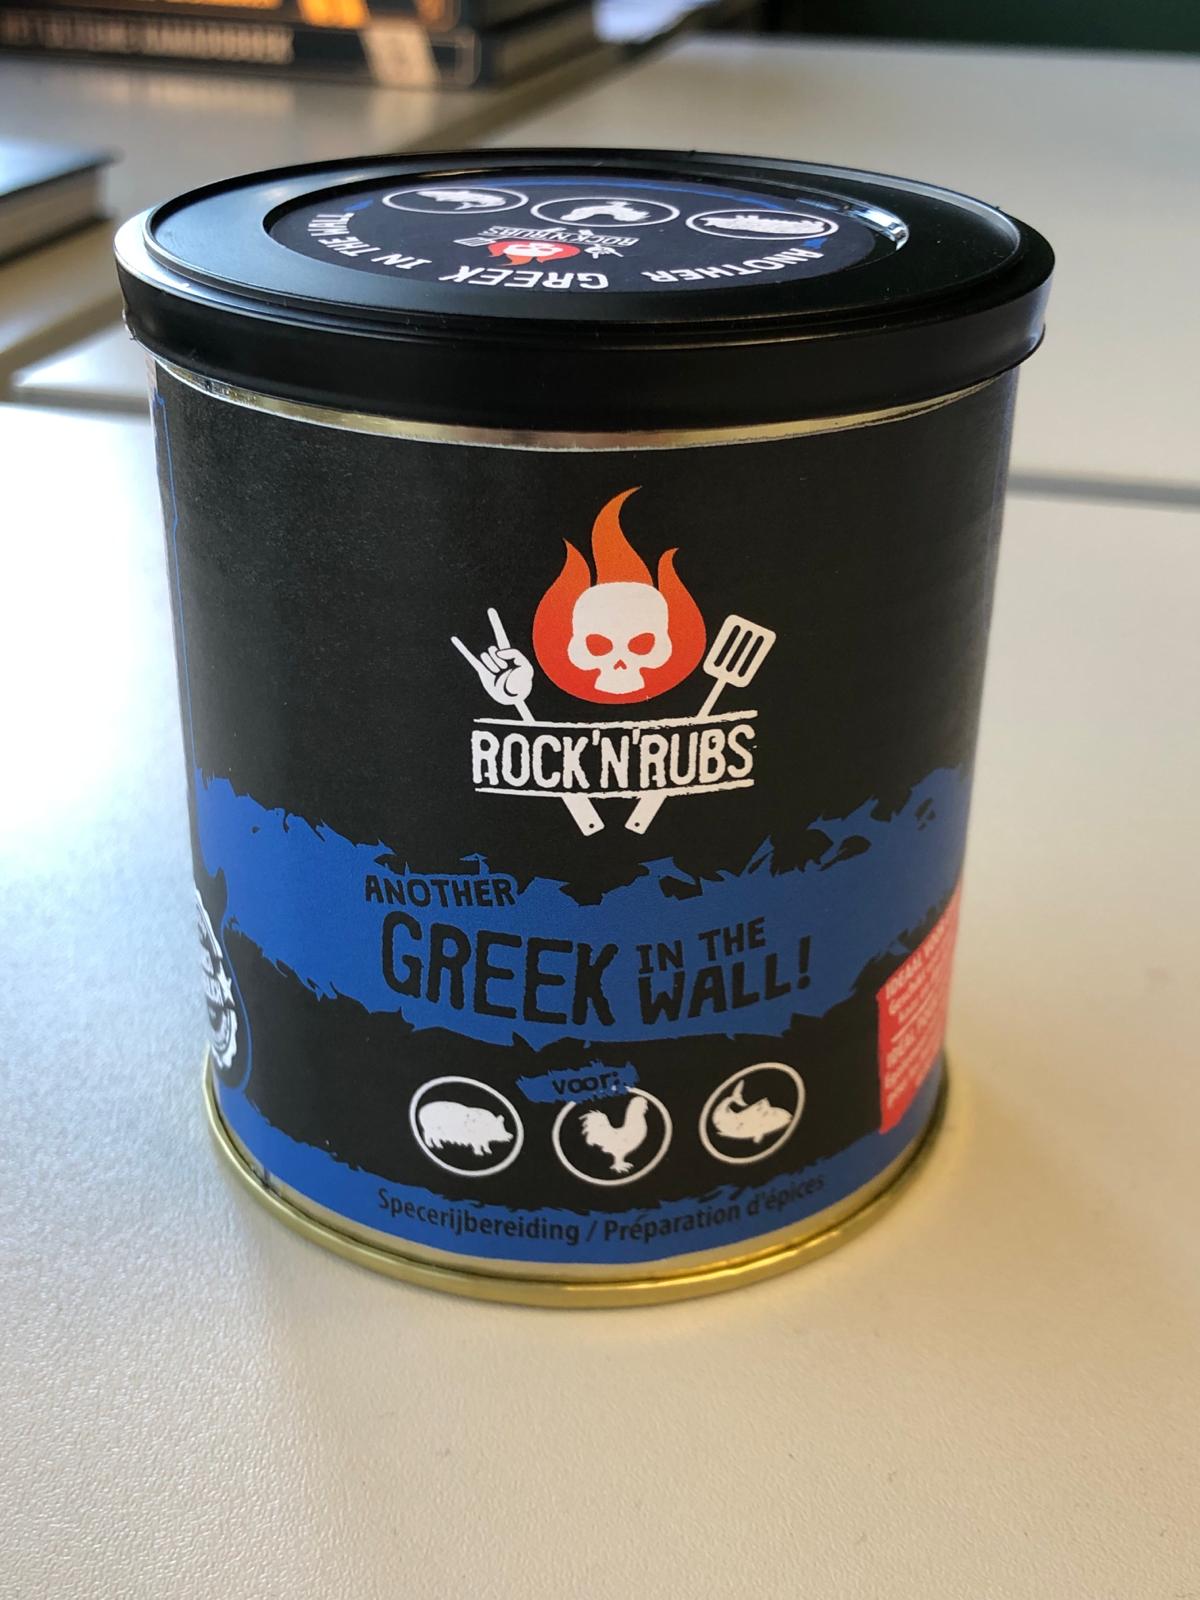 Rock 'n' rubs - Another Greek in the Wall!